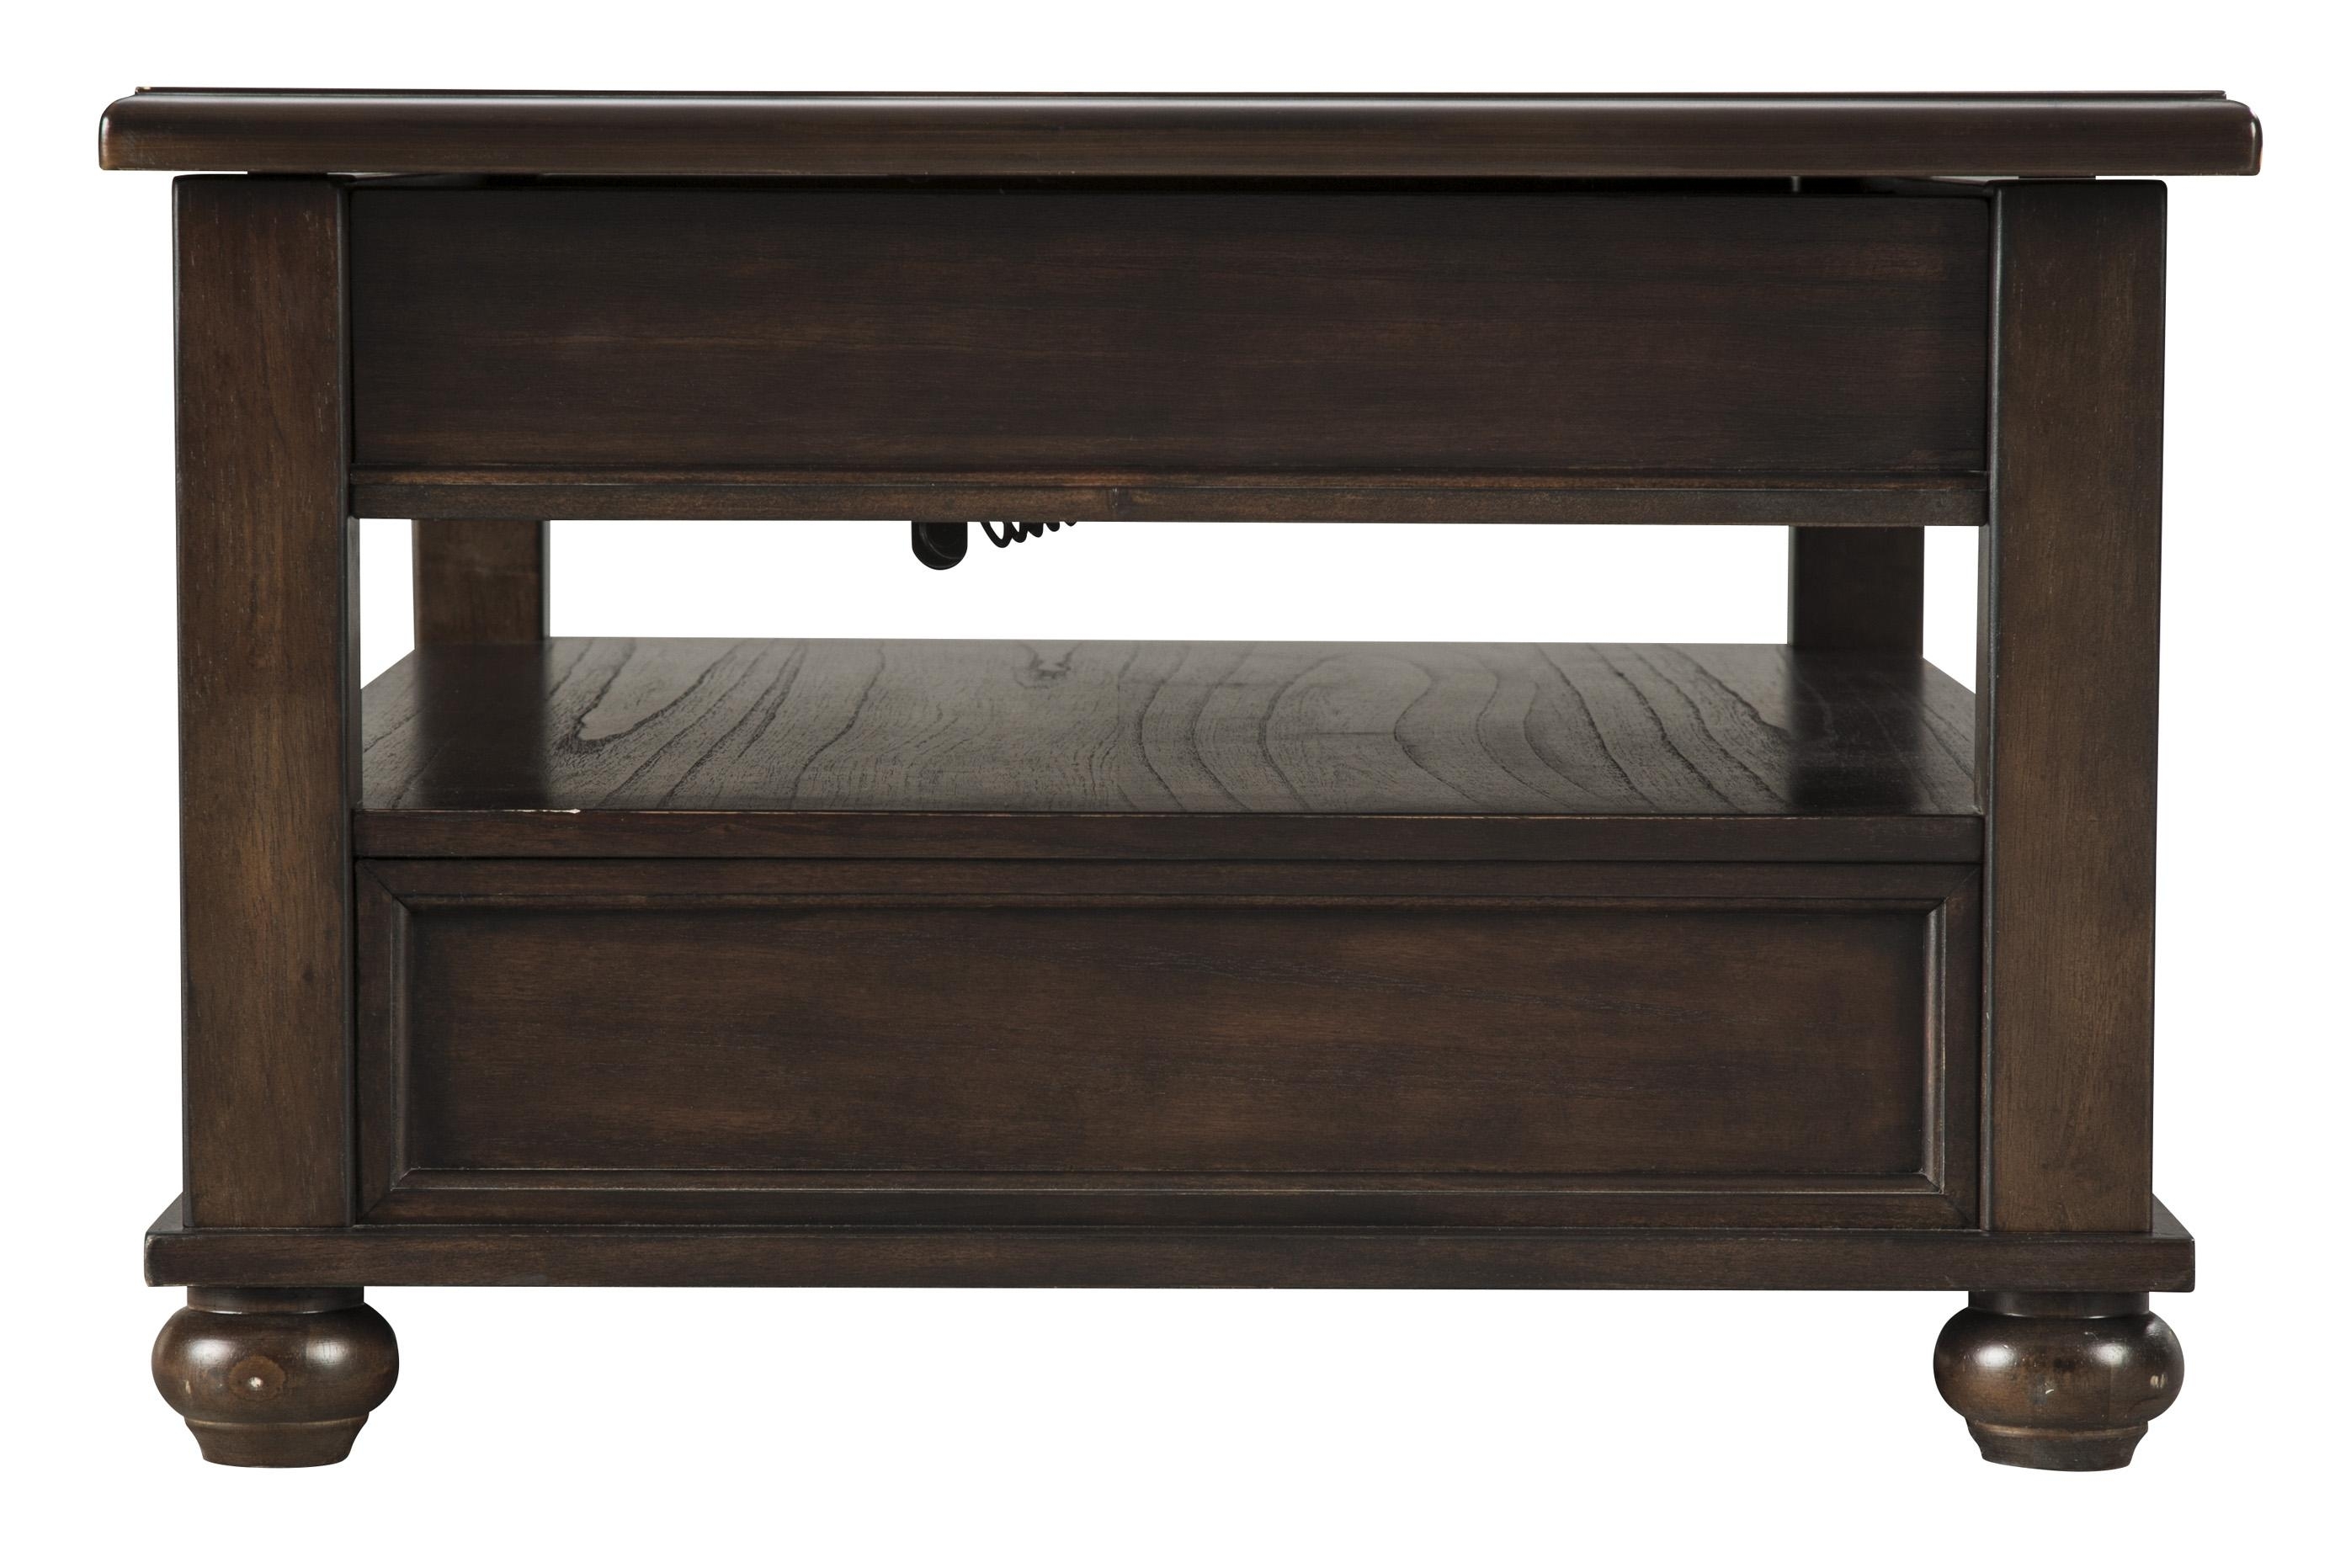 Wooden Lift Top Cocktail Table With 1 Drawer And Open Compartment, Brown- Saltoro Sherpi